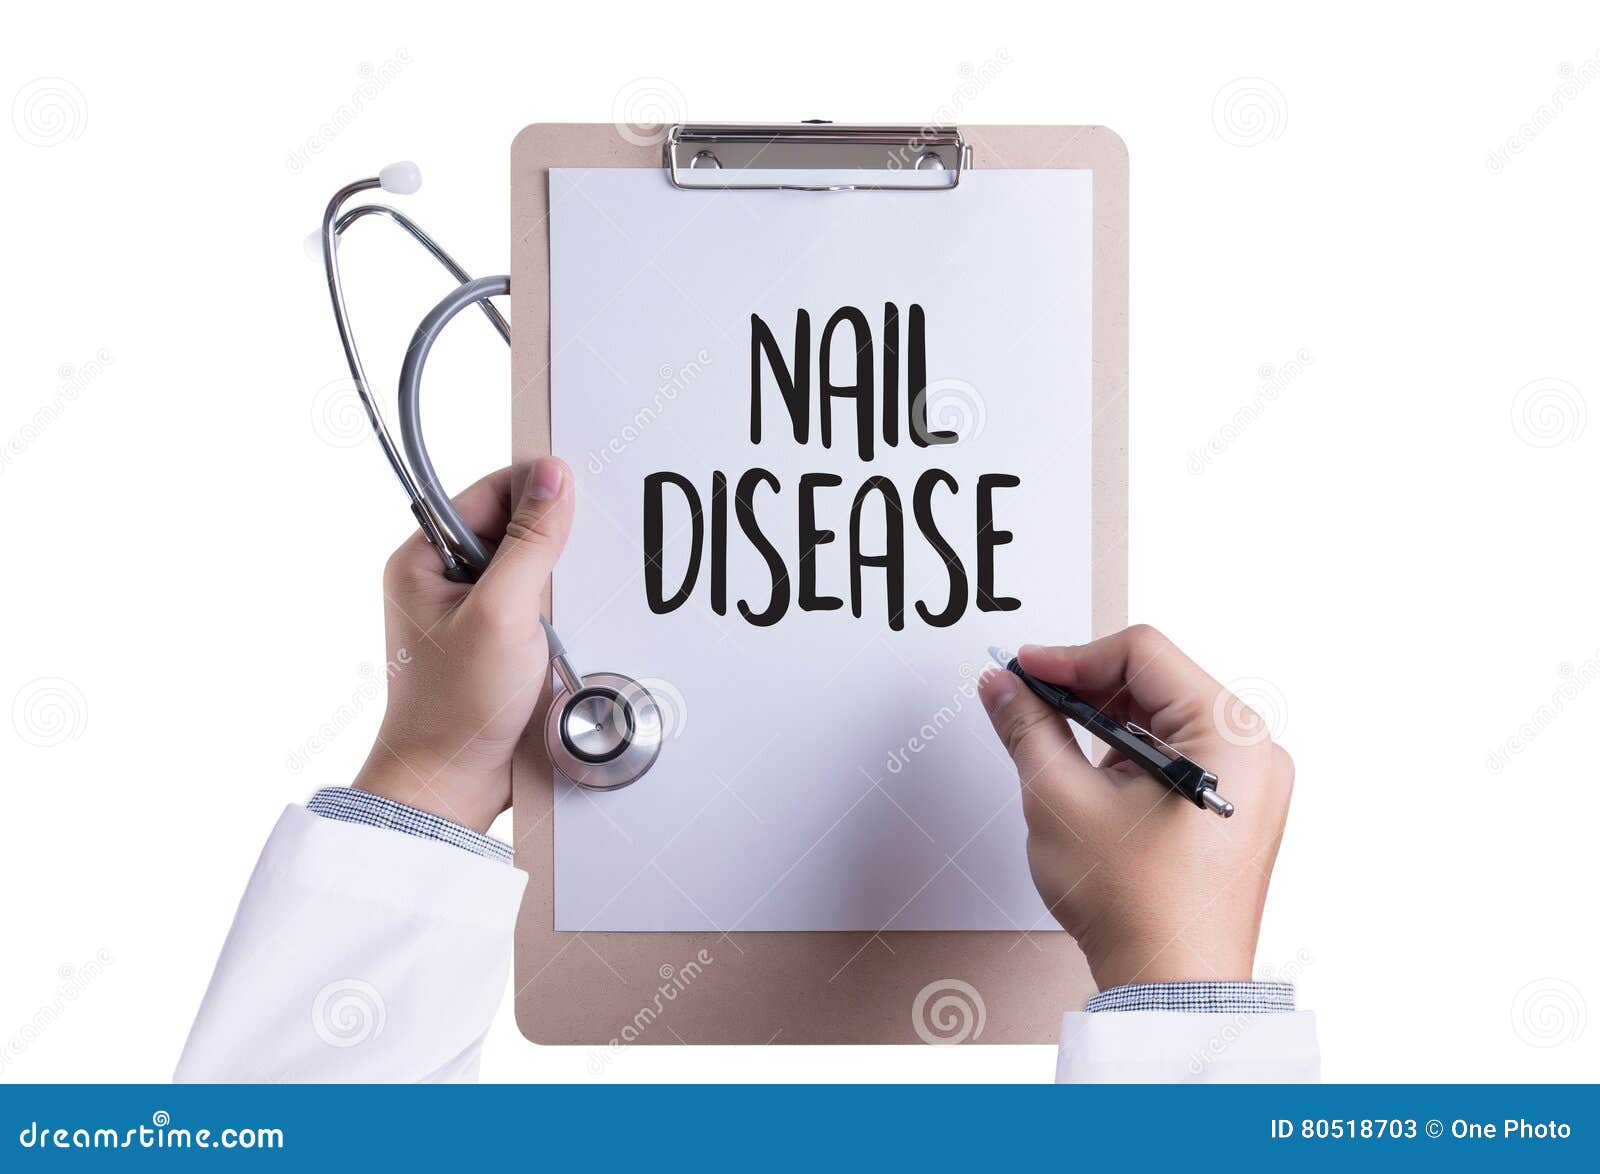 nail disease fungus infection on nails hand, finger with onycho